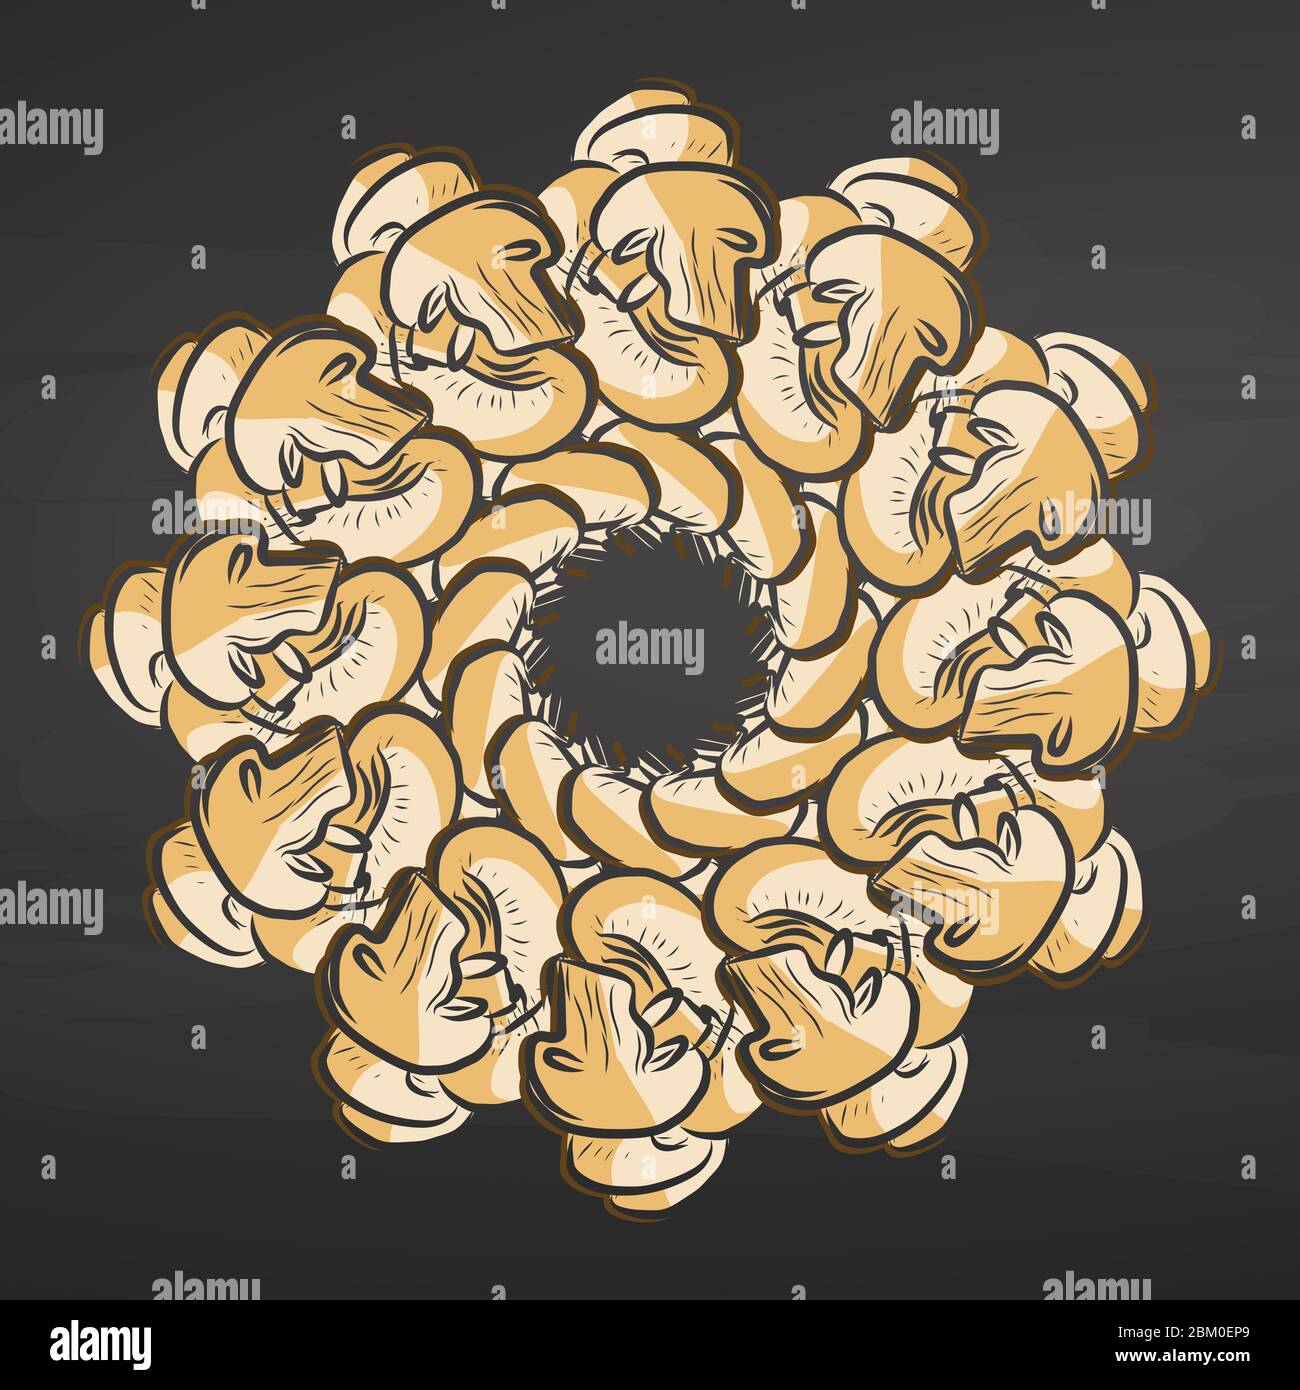 Mushrooms arranged in a circle. Seamless round composition with hand drawn veggies. Vector illustration on blackboard. Stock Vector